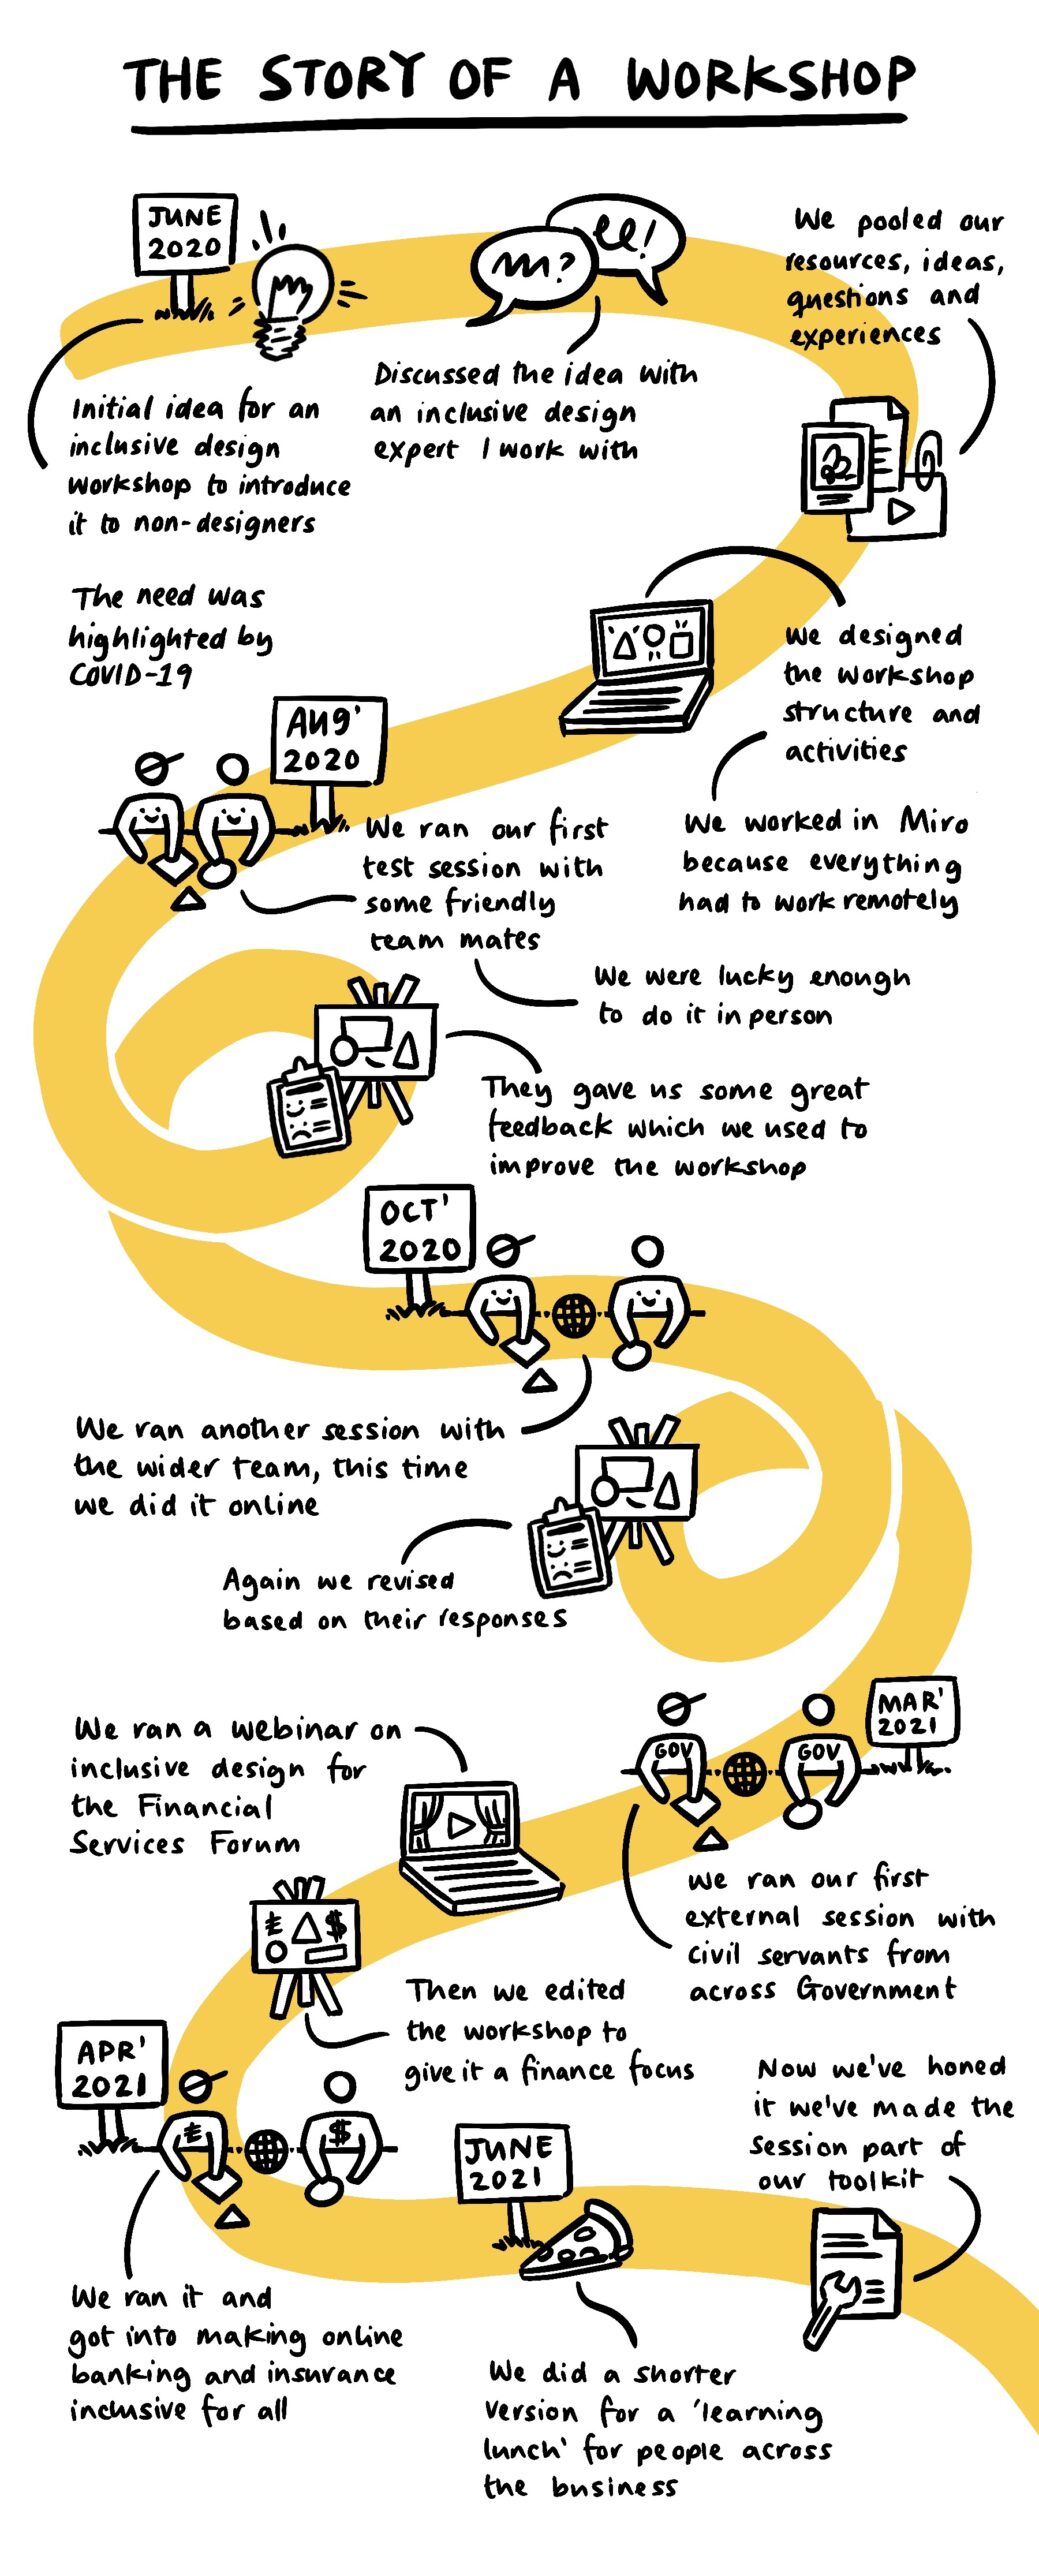 A long winding yellow line is used like a time line to anchor the timeline of the development of the inclusive design workshops I've been running. Each entry has a small drawing.